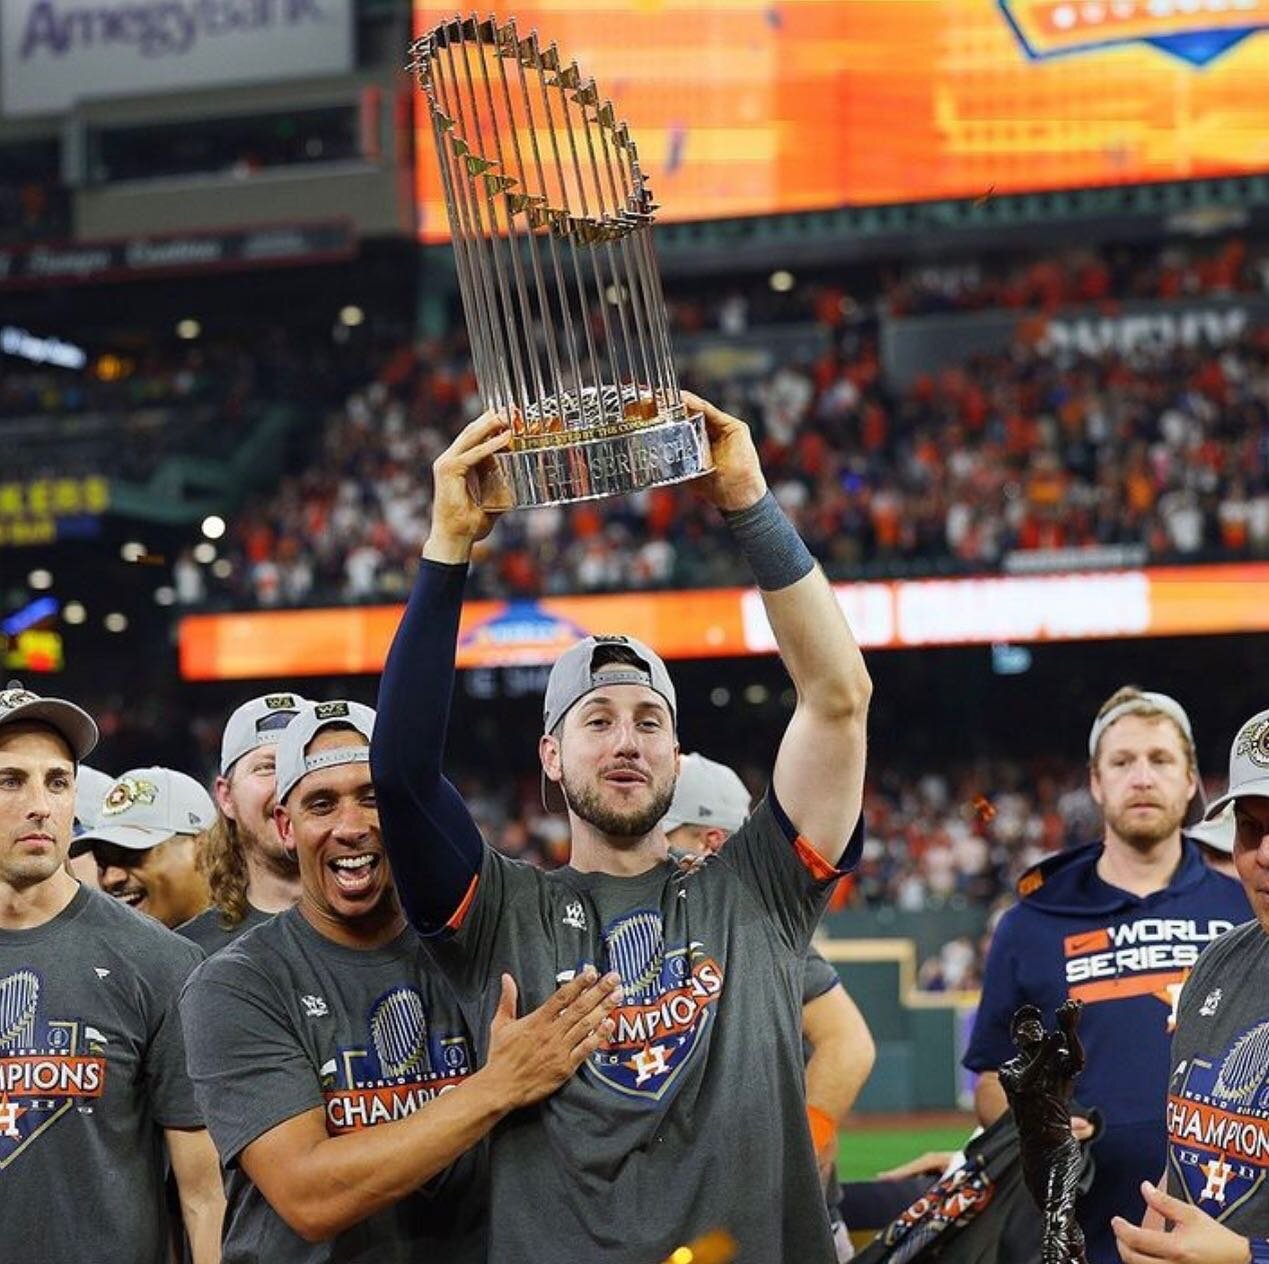 All the feels. 

Congrats @ktuck_30, WORLD SERIES CHAMPS! 🎉👑

#athletesandcauses #fortheh #gostros #worldserieschamps #tuckercares #kyletuckerfoundation #houstonnonprofit